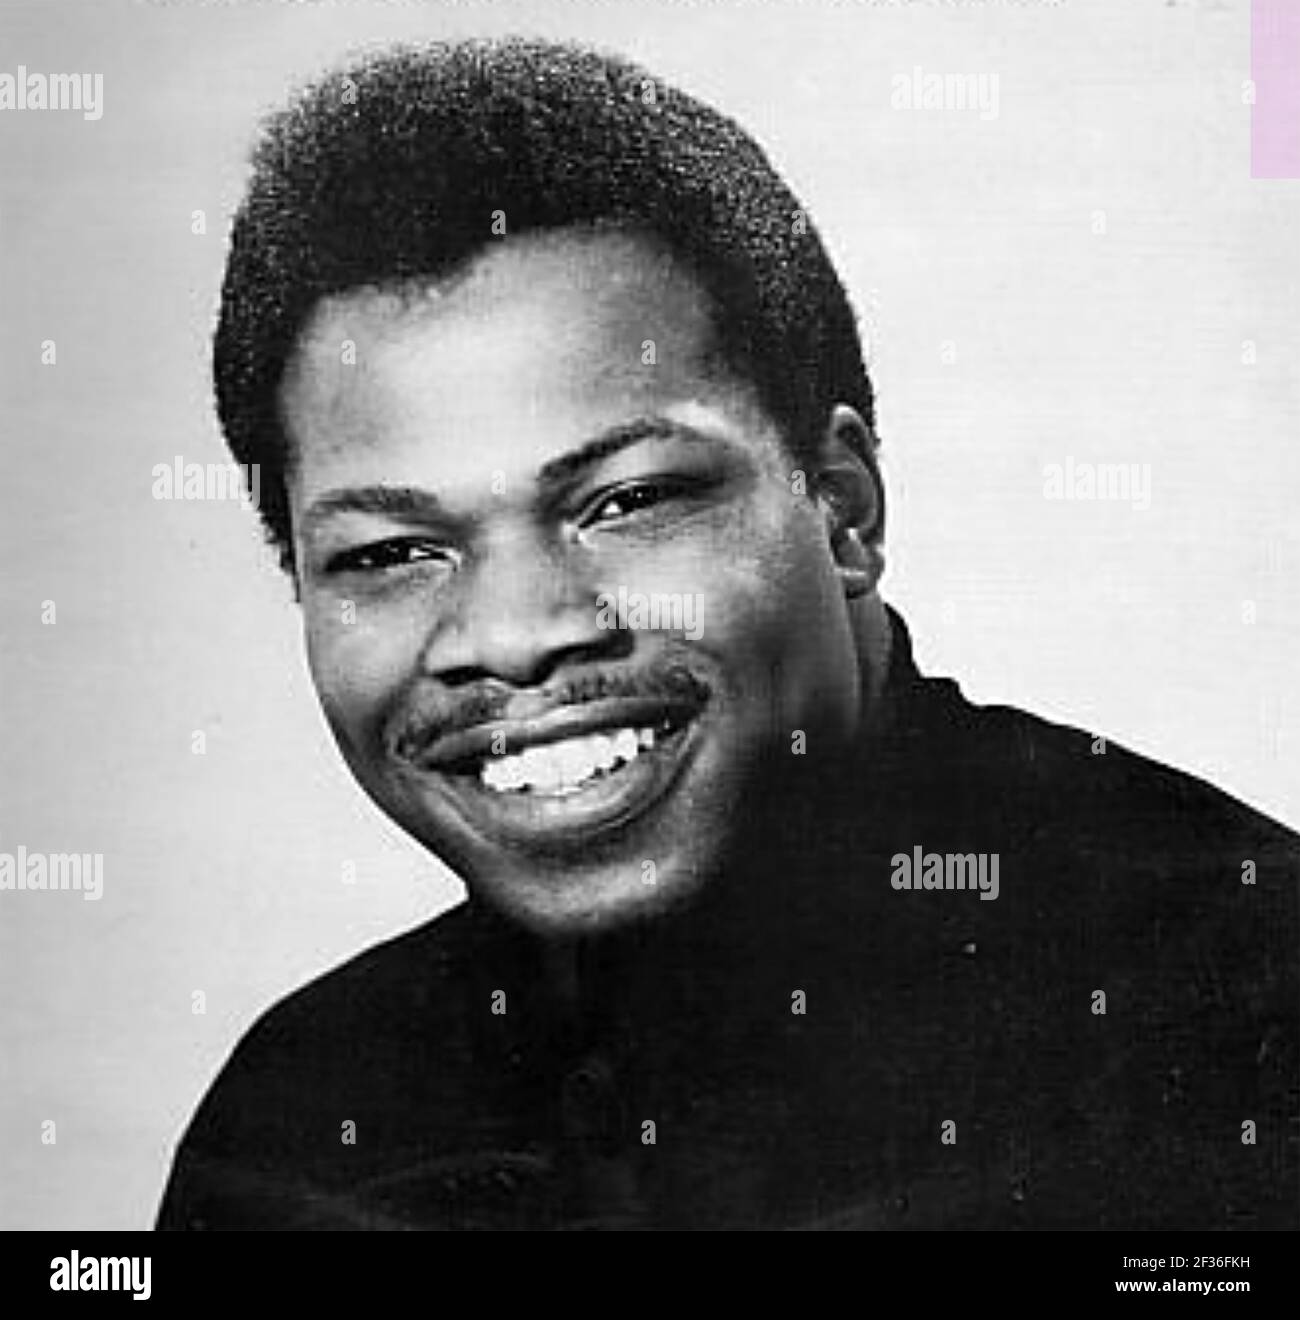 BIG AL DOWNING (1840-2005) Promotional photo of American singer, songwriter and pianist about 1980 Stock Photo